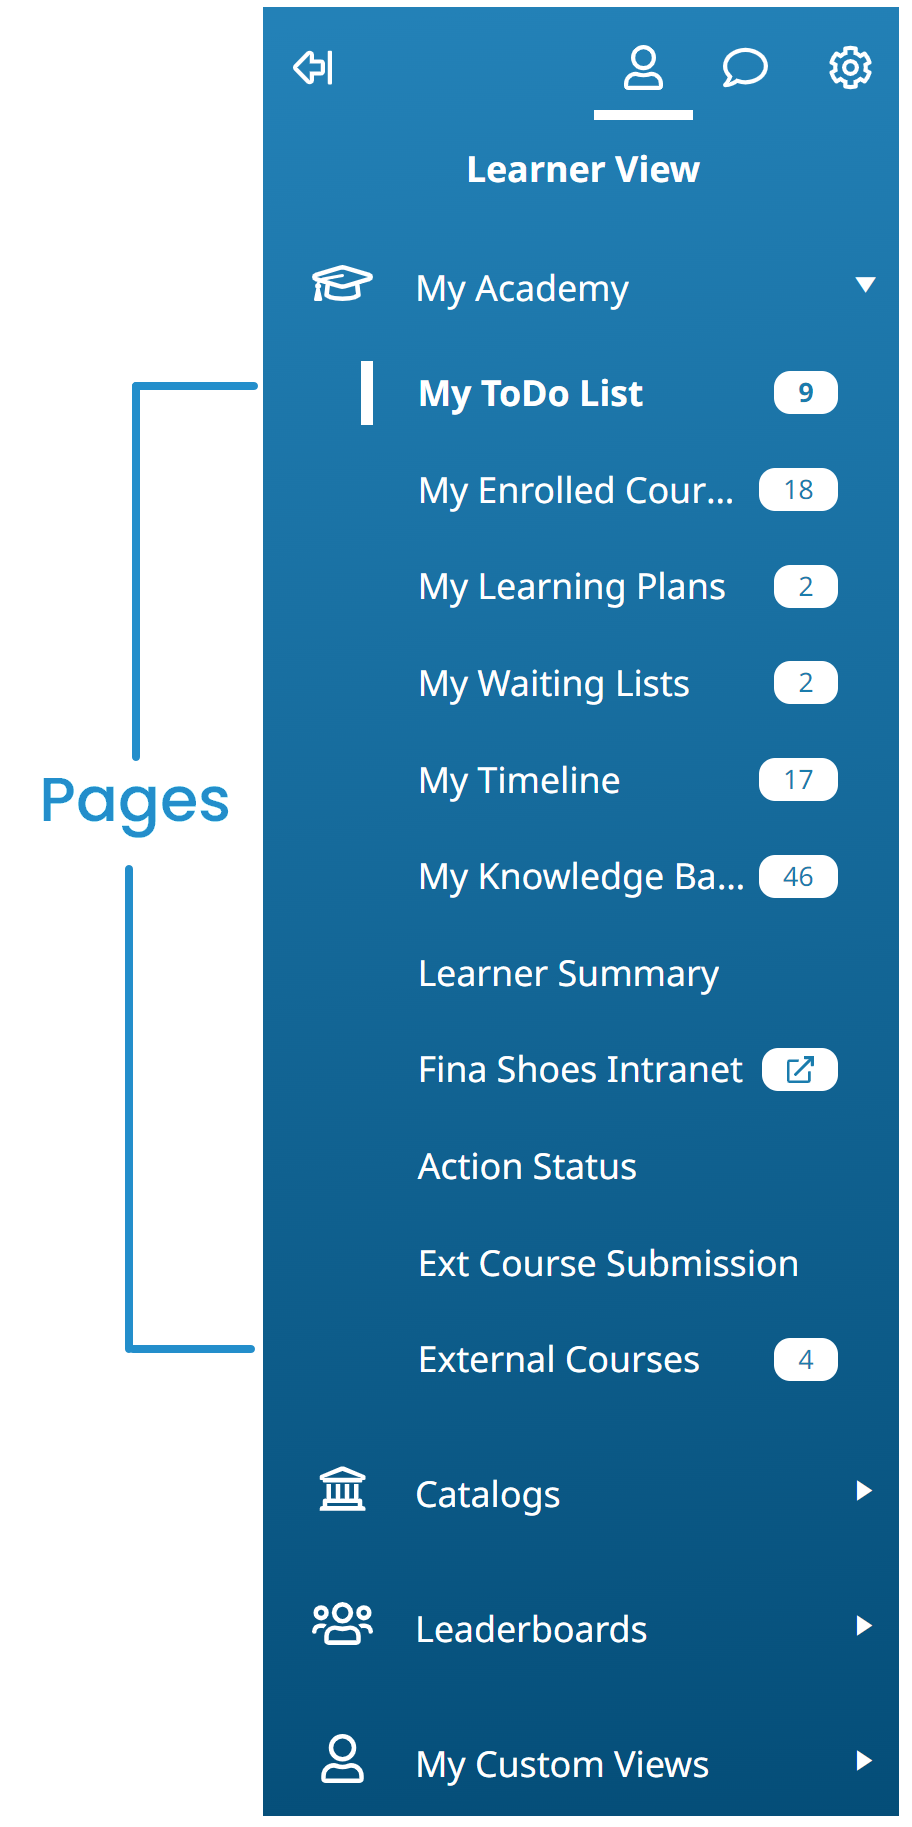 Learner UI - Pages 20220621